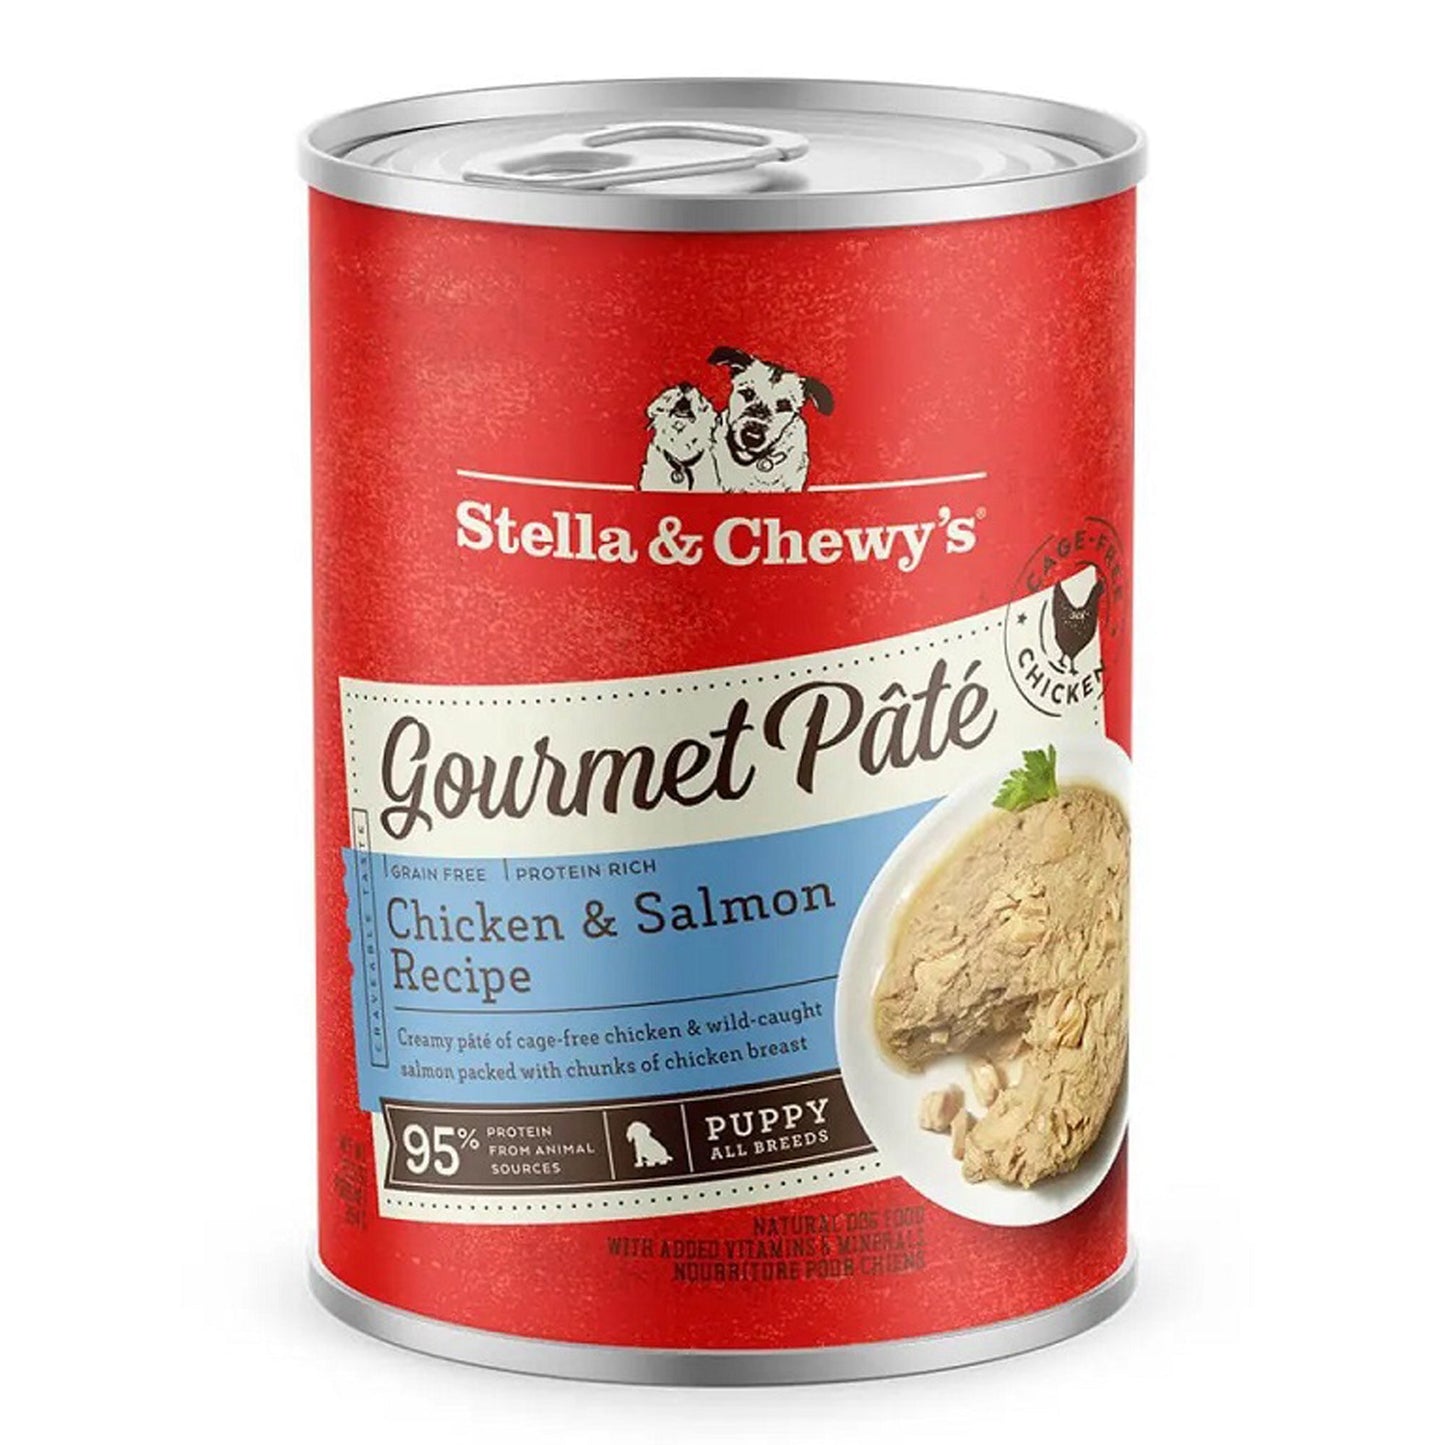 Stella And Chewys Dog Gourmet Pate Puppy Chicken And Salmon 12.5oz. (Case of 12)